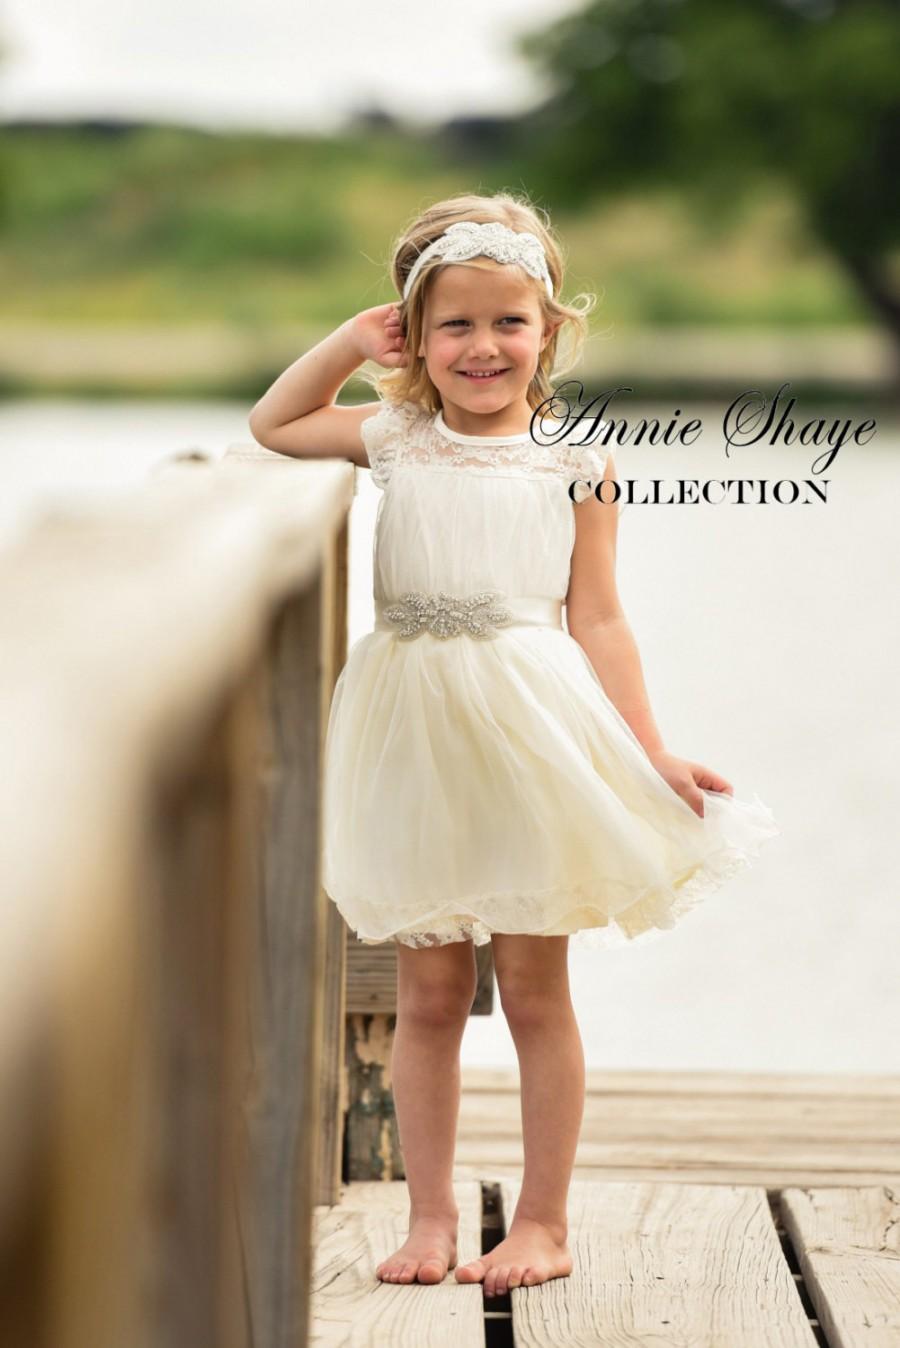 Свадьба - Olivia Dress by Annie Shaye - flower girl dress ivory, lace toddler dress made for girls ages 9-12M,1t,2t,3t,4t,5,6,7,8, 9,10,11,12,13,14